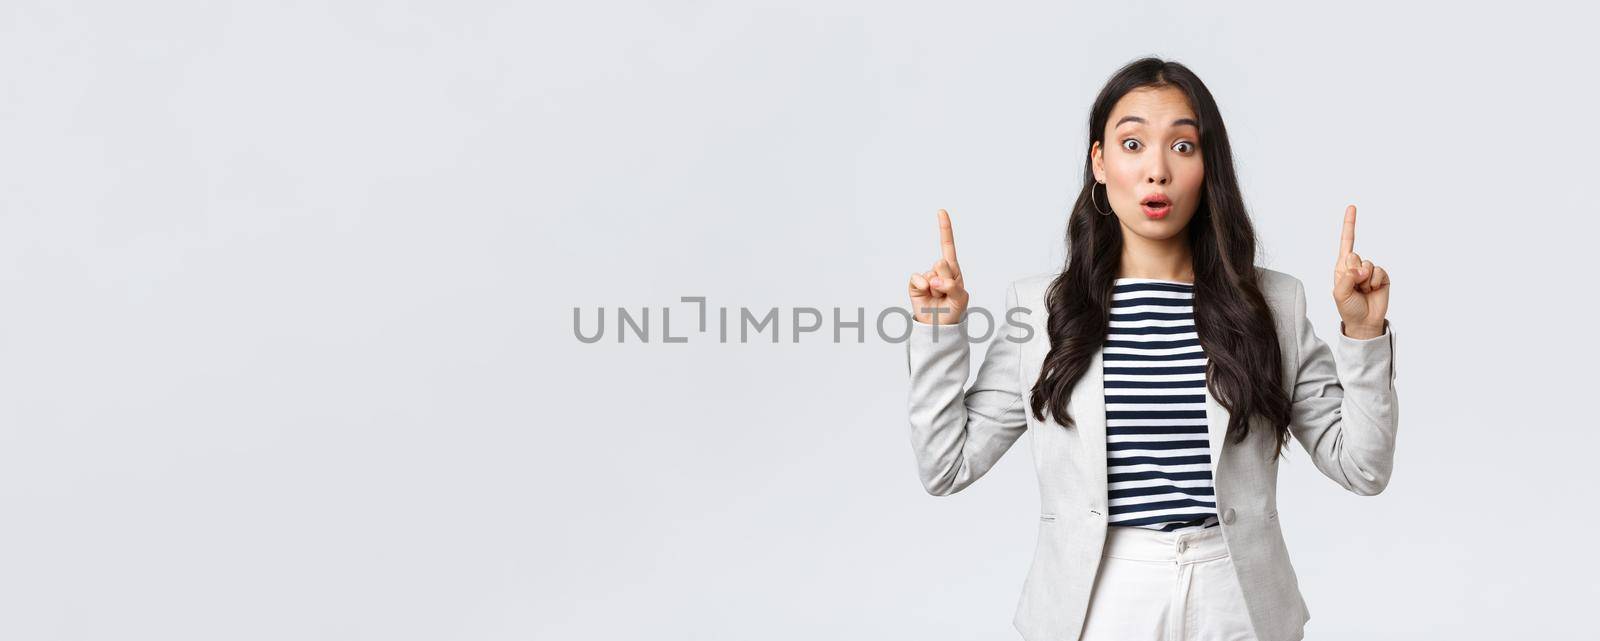 Business, finance and employment, female successful entrepreneurs concept. Real estate worker in white suit inform people about special offer, pointing fingers up saying wow.